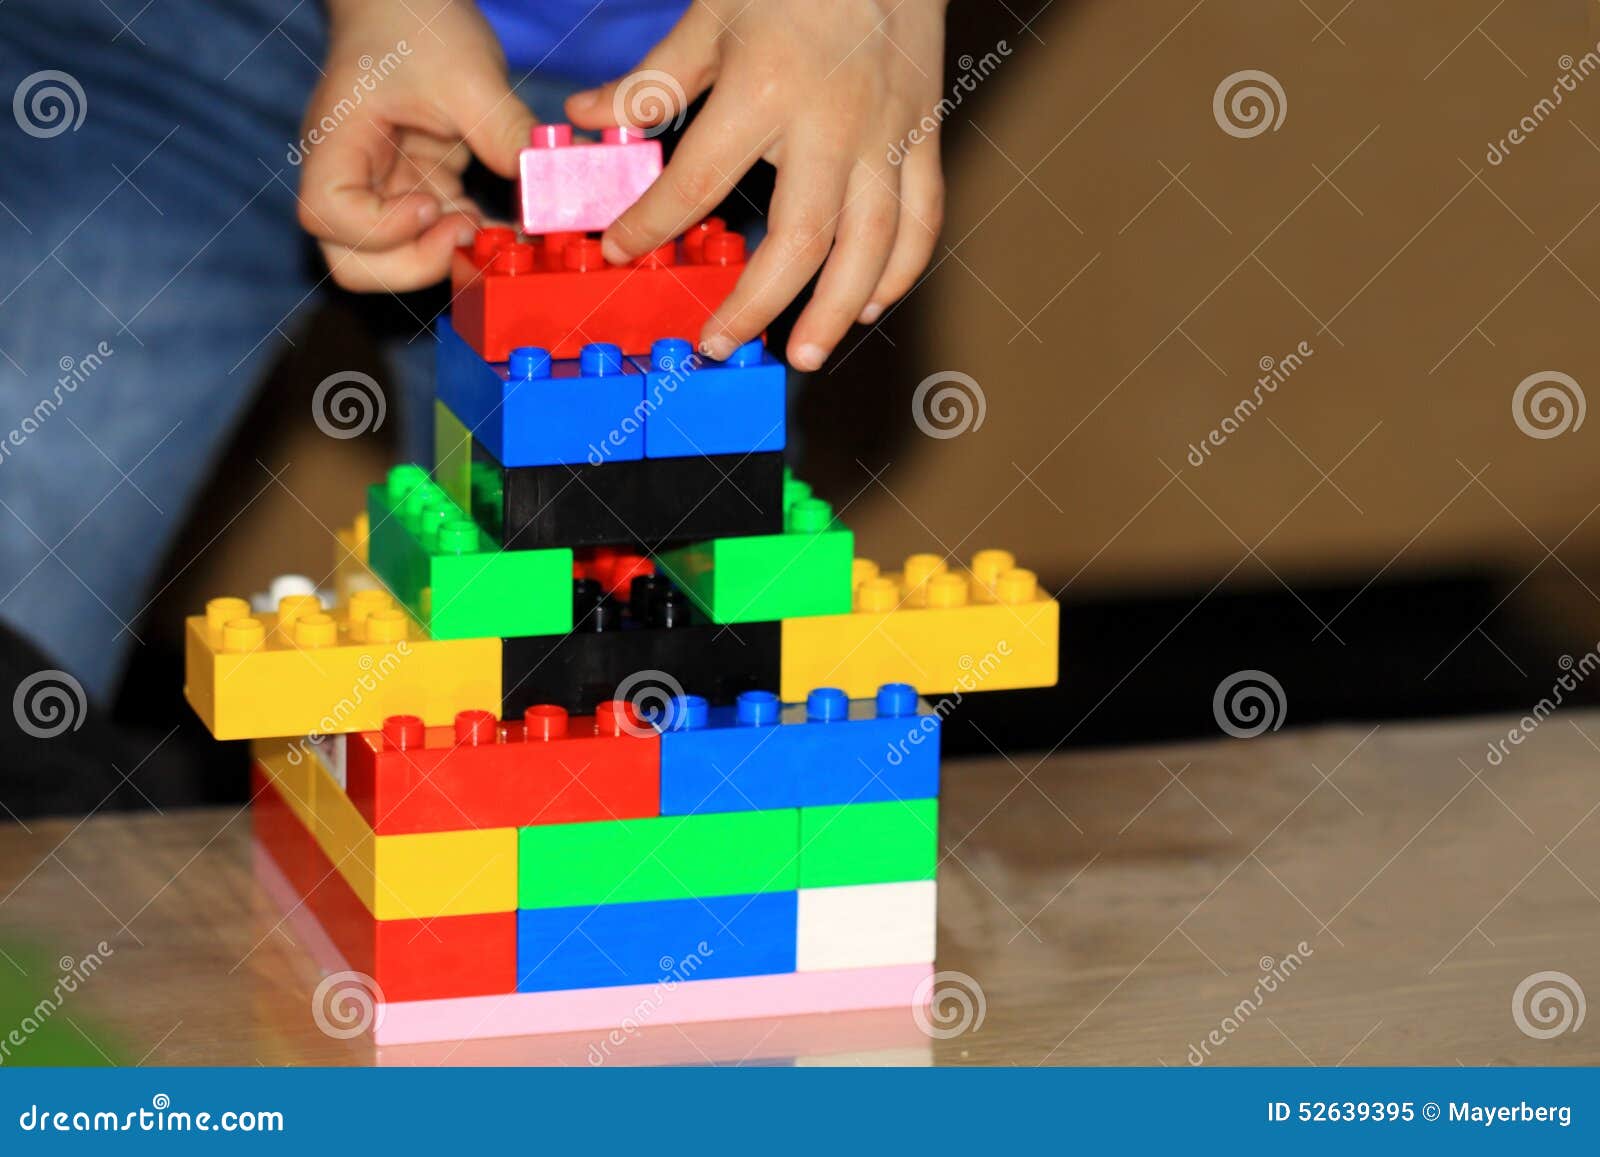 play with lego